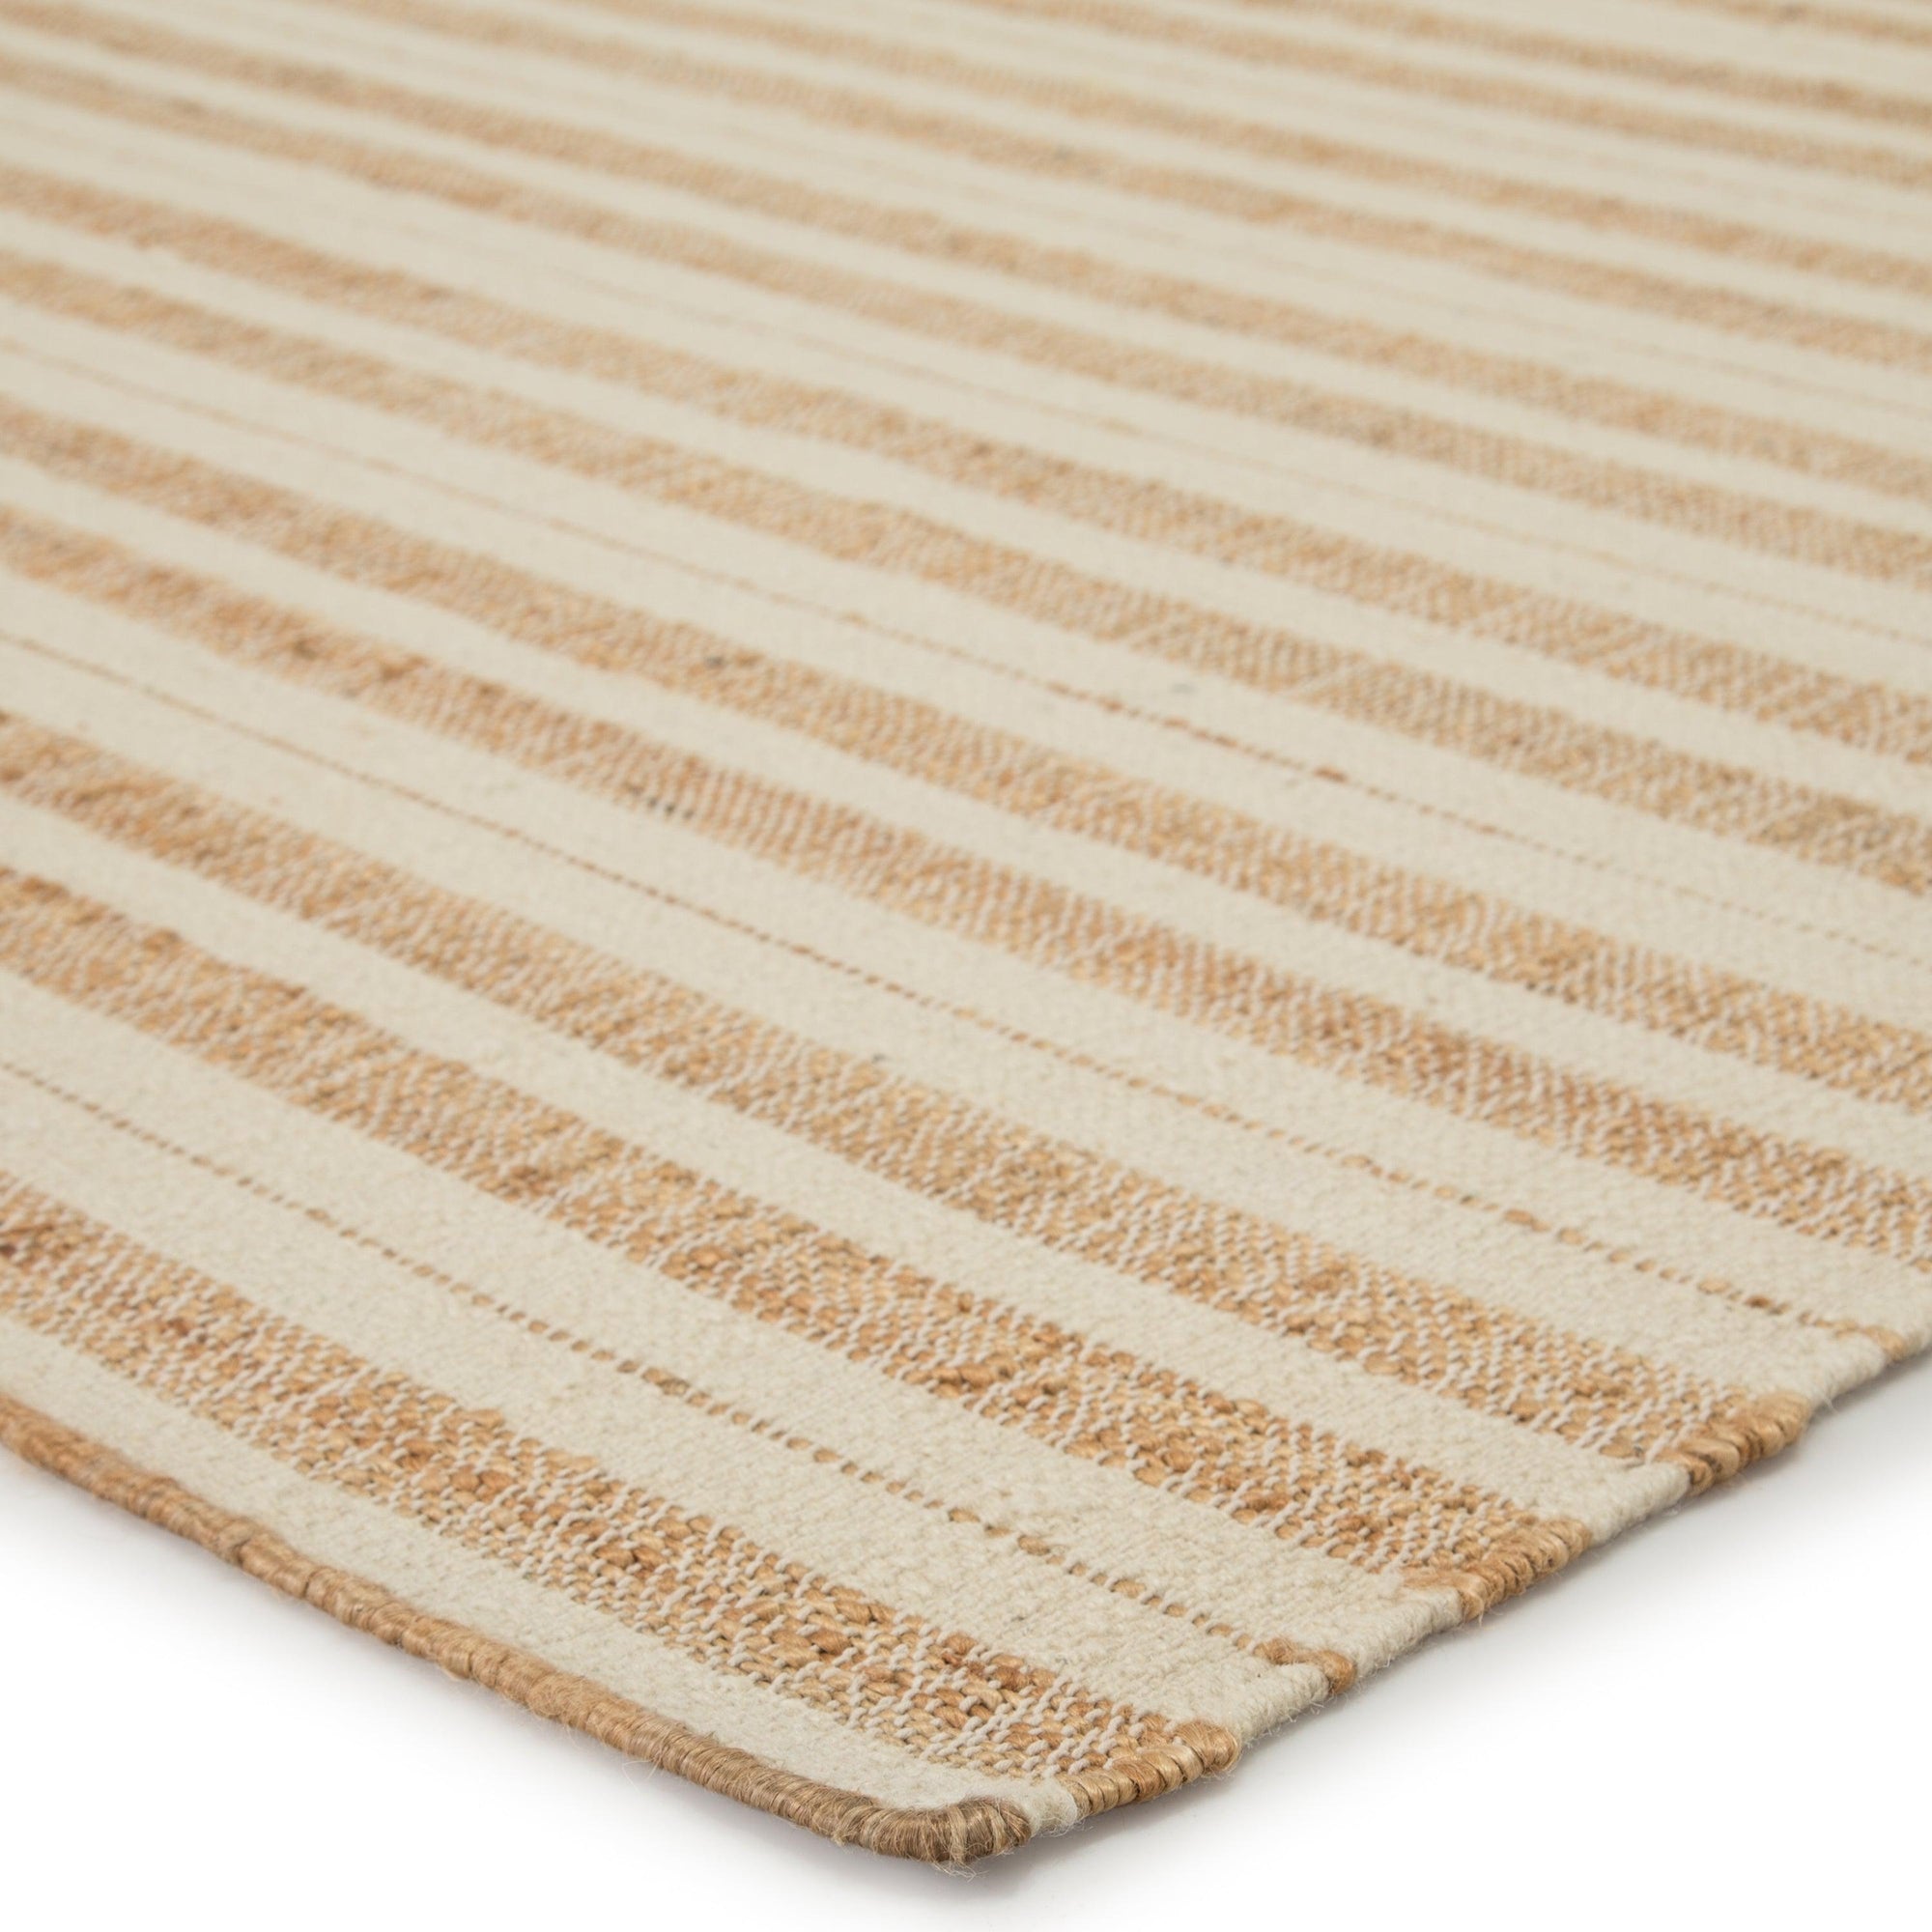 Rugs by Roo | Jaipur Living Rey Natural Striped Tan Ivory Area Rug-RUG146017